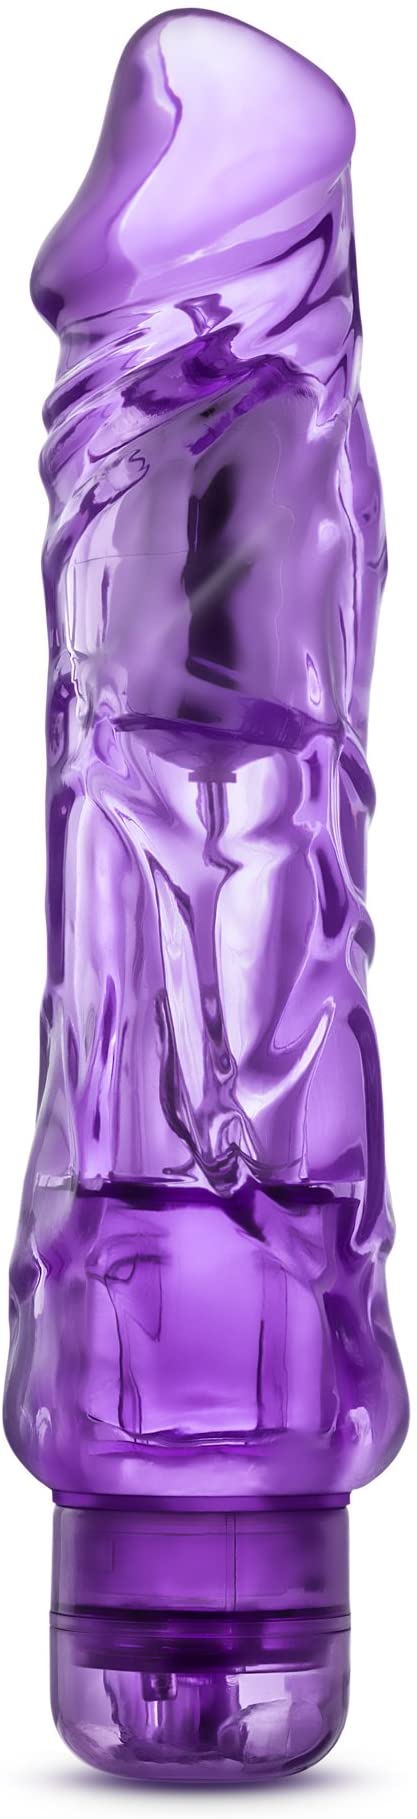 9" Soft Large Thick Realistic Vibrating Dildo - Multi Speed Powerful Vibrator - Waterproof - Sex Toy for Women - Sex Toy for Adults (Purple)